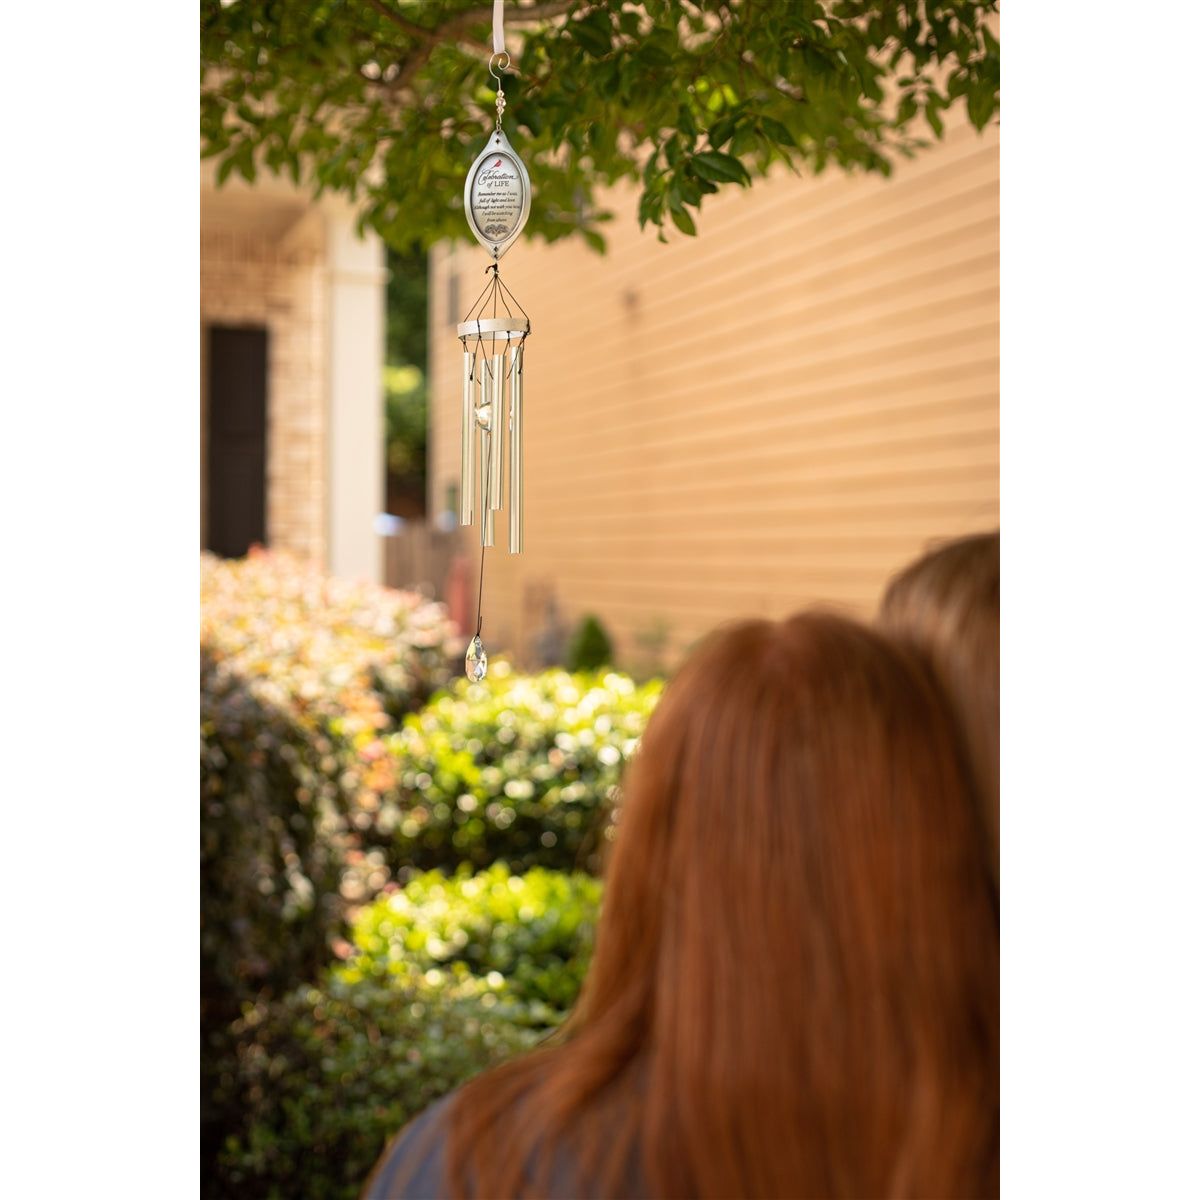 Two women admiring the windchime hanging in a tree.